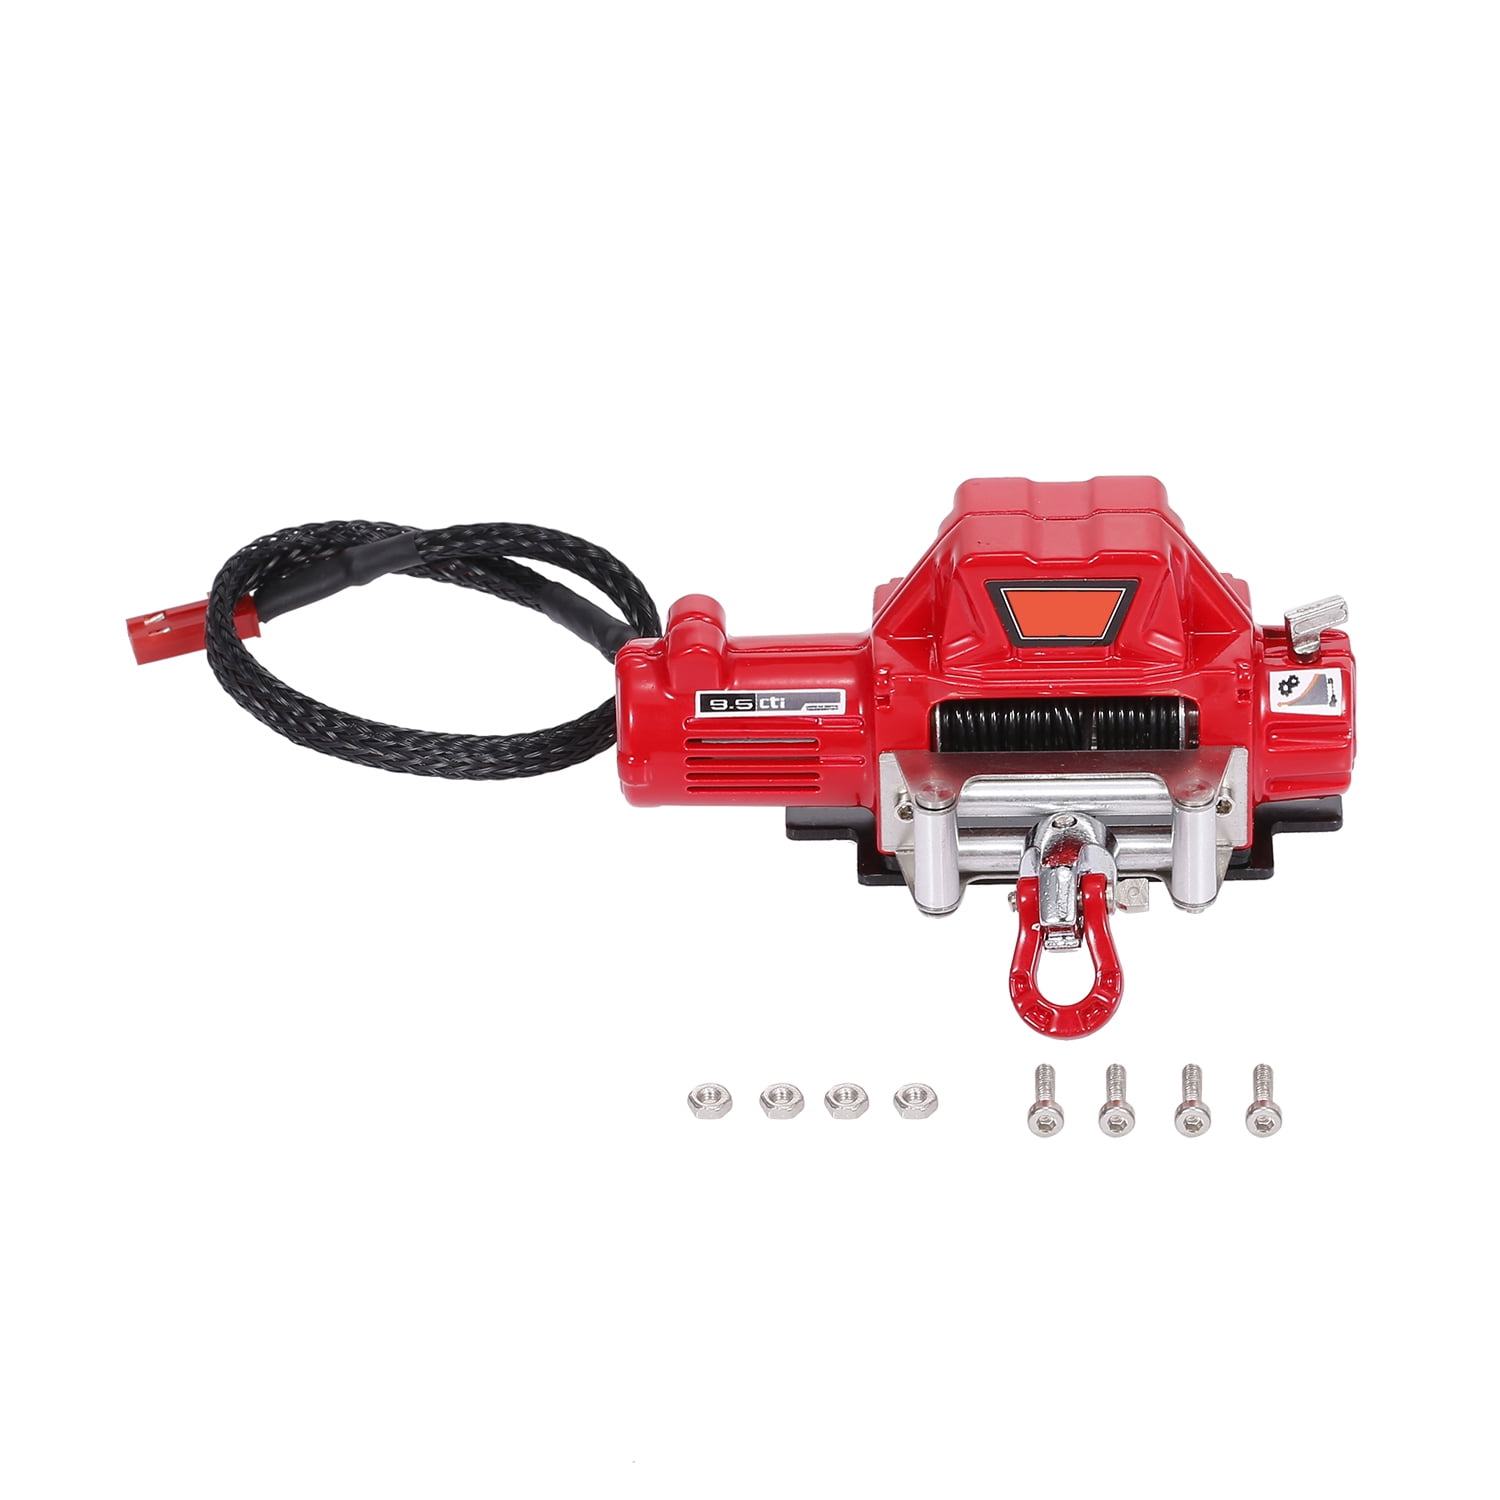 GoolRC Compatible with 1/10 RC Car Automatic Winch RC Winch Wireless RC Car Decoration Simulated Accessories for Traxxas Redcat Tamiya Axial SCX10 D90 HPI RC Crawler - Walmart.com